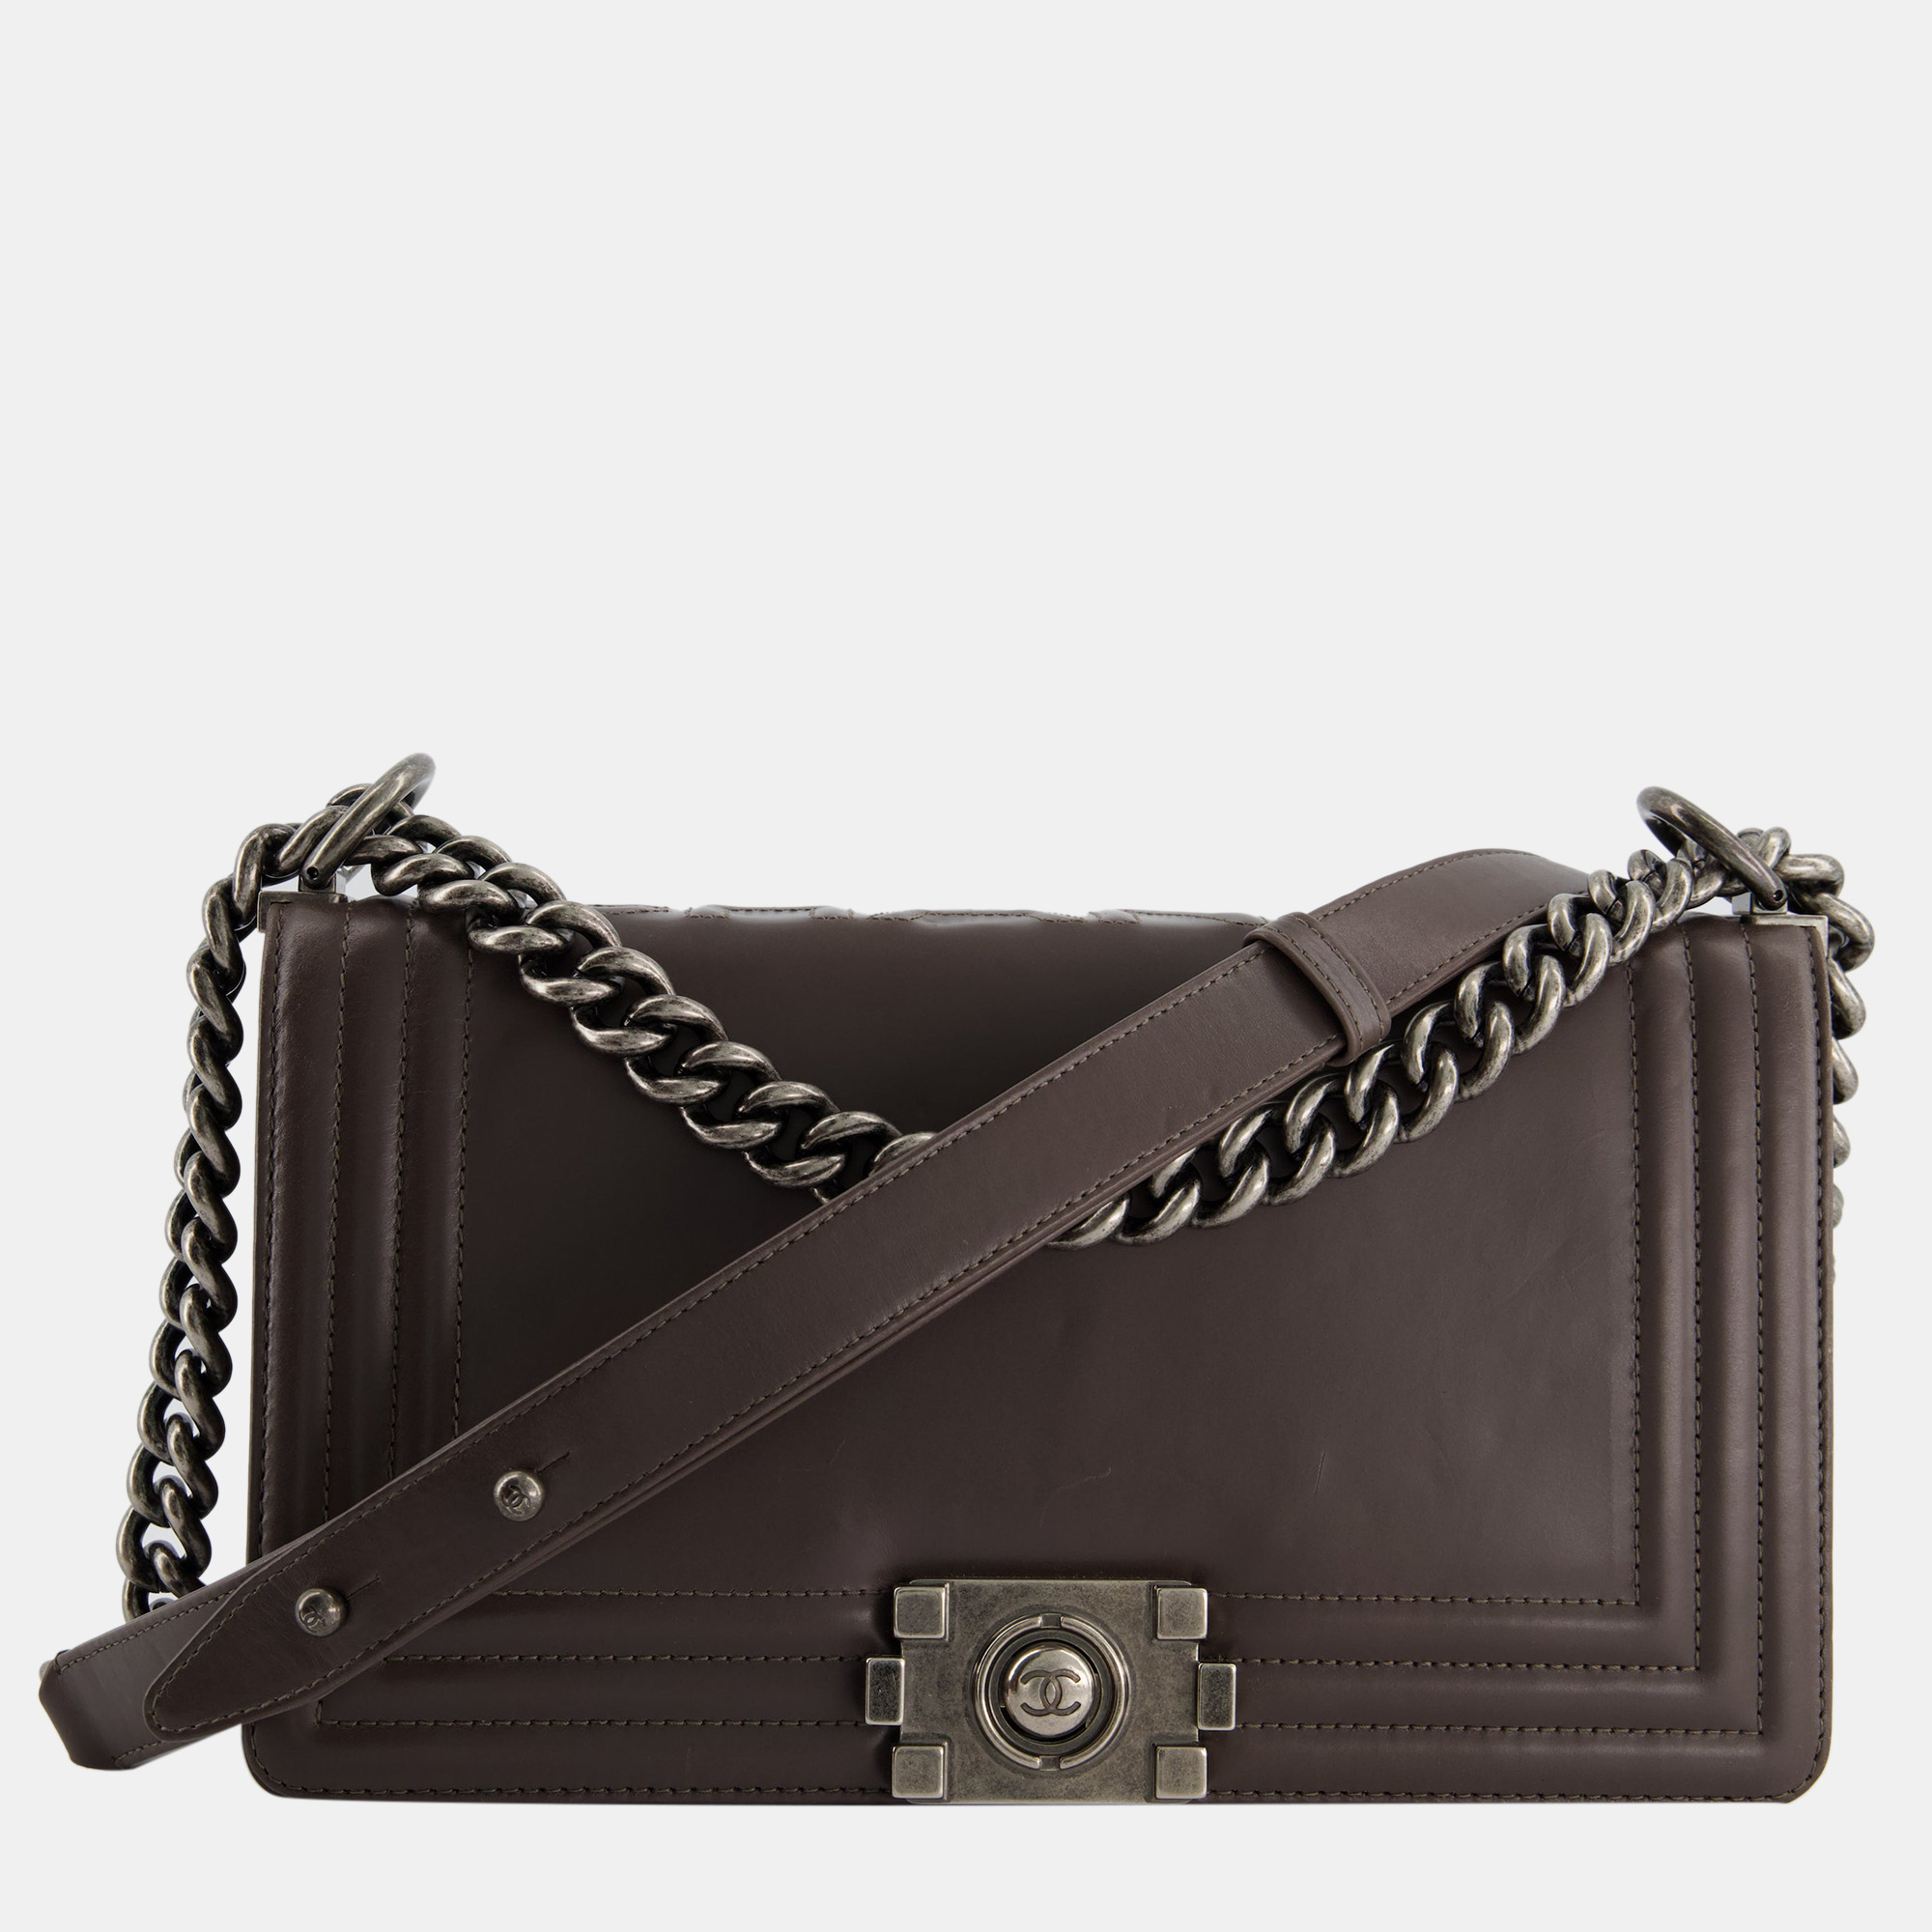 Chanel Chocolate Brown Smooth Calfskin Leather Boy Bag With Stitched Chanel Logo Detail And Gunmetal Hardware